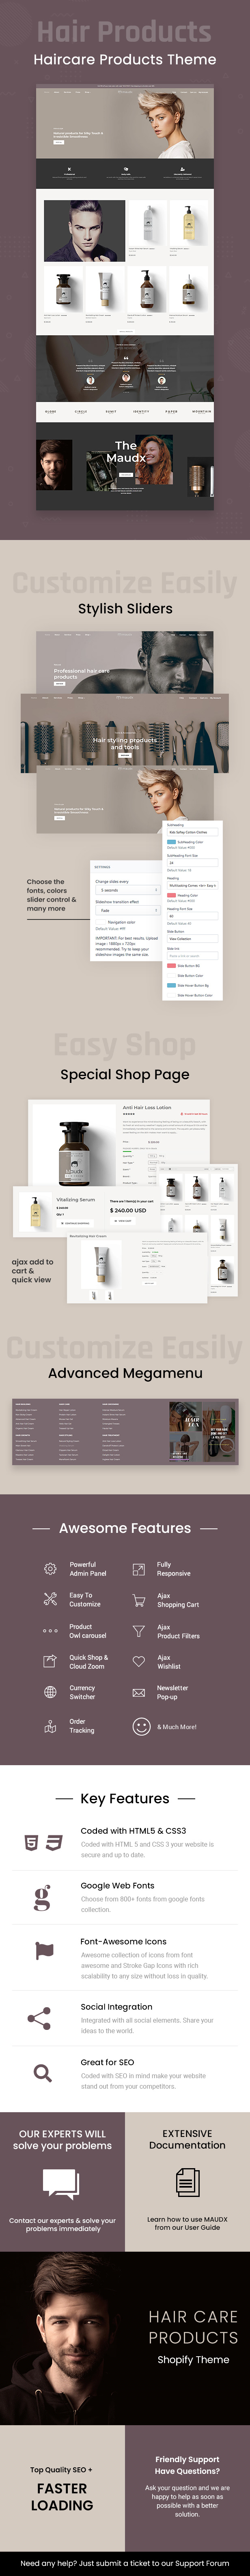 Maudx - Hair Care Products Shopify Theme - 1